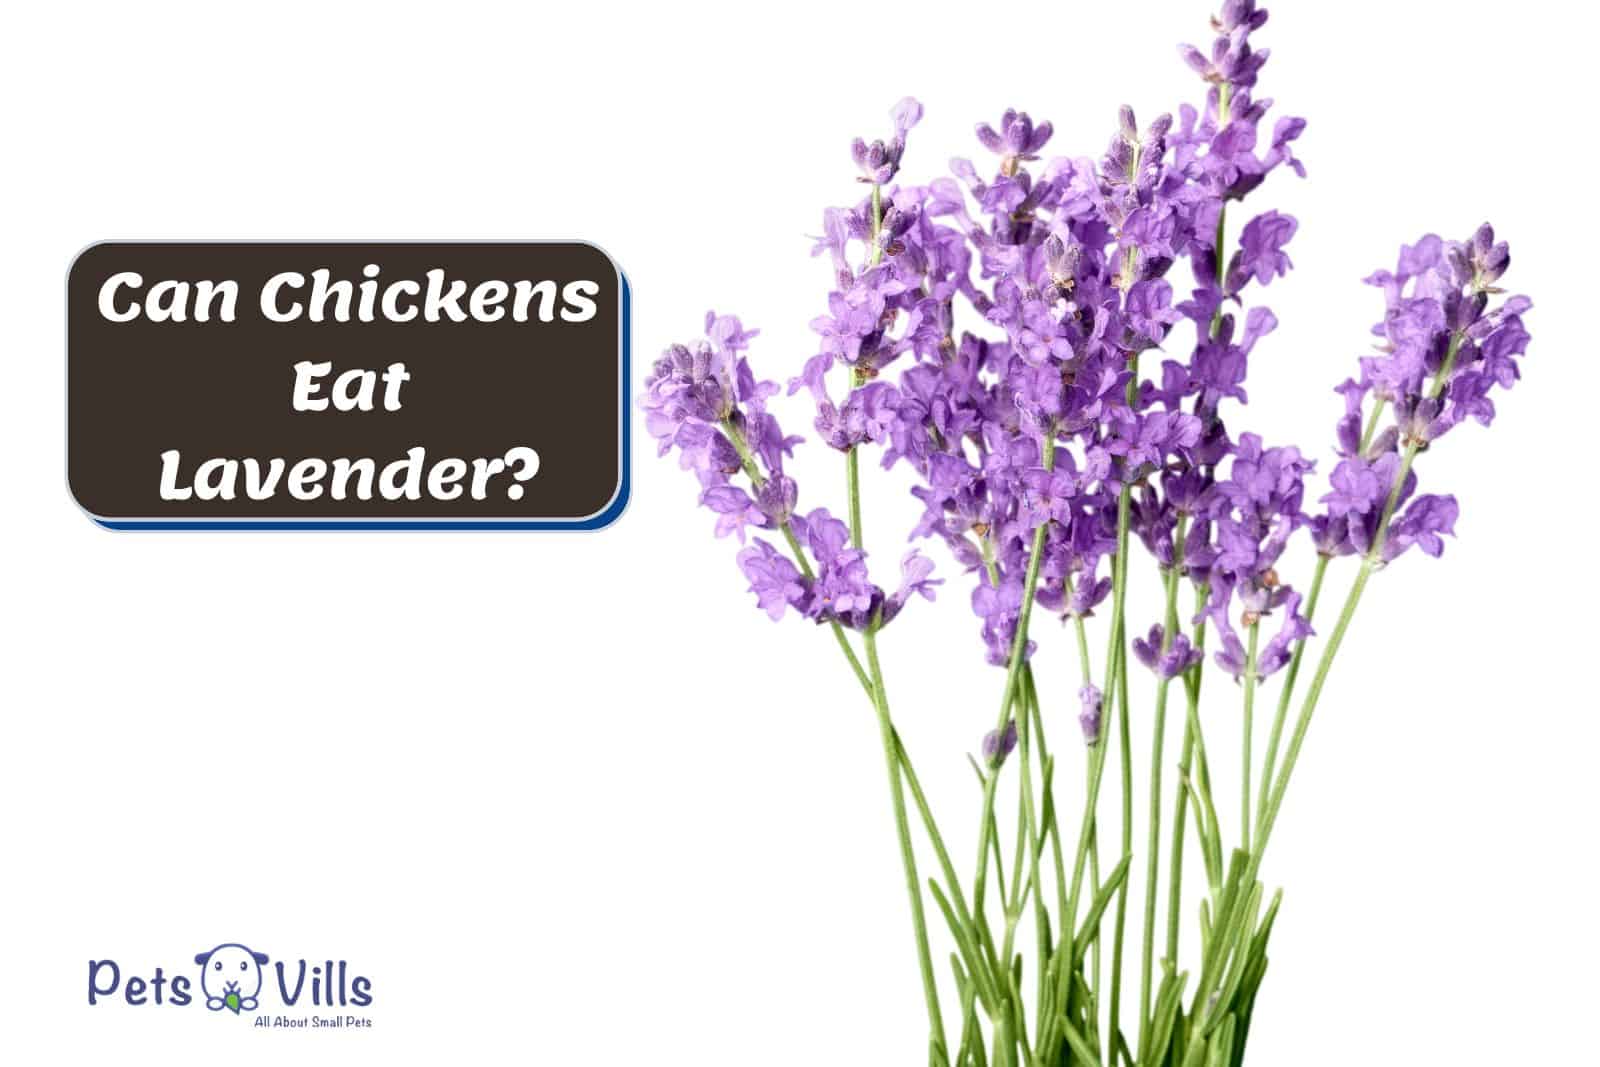 fresh lavender flowers but Can Chickens Eat Lavender